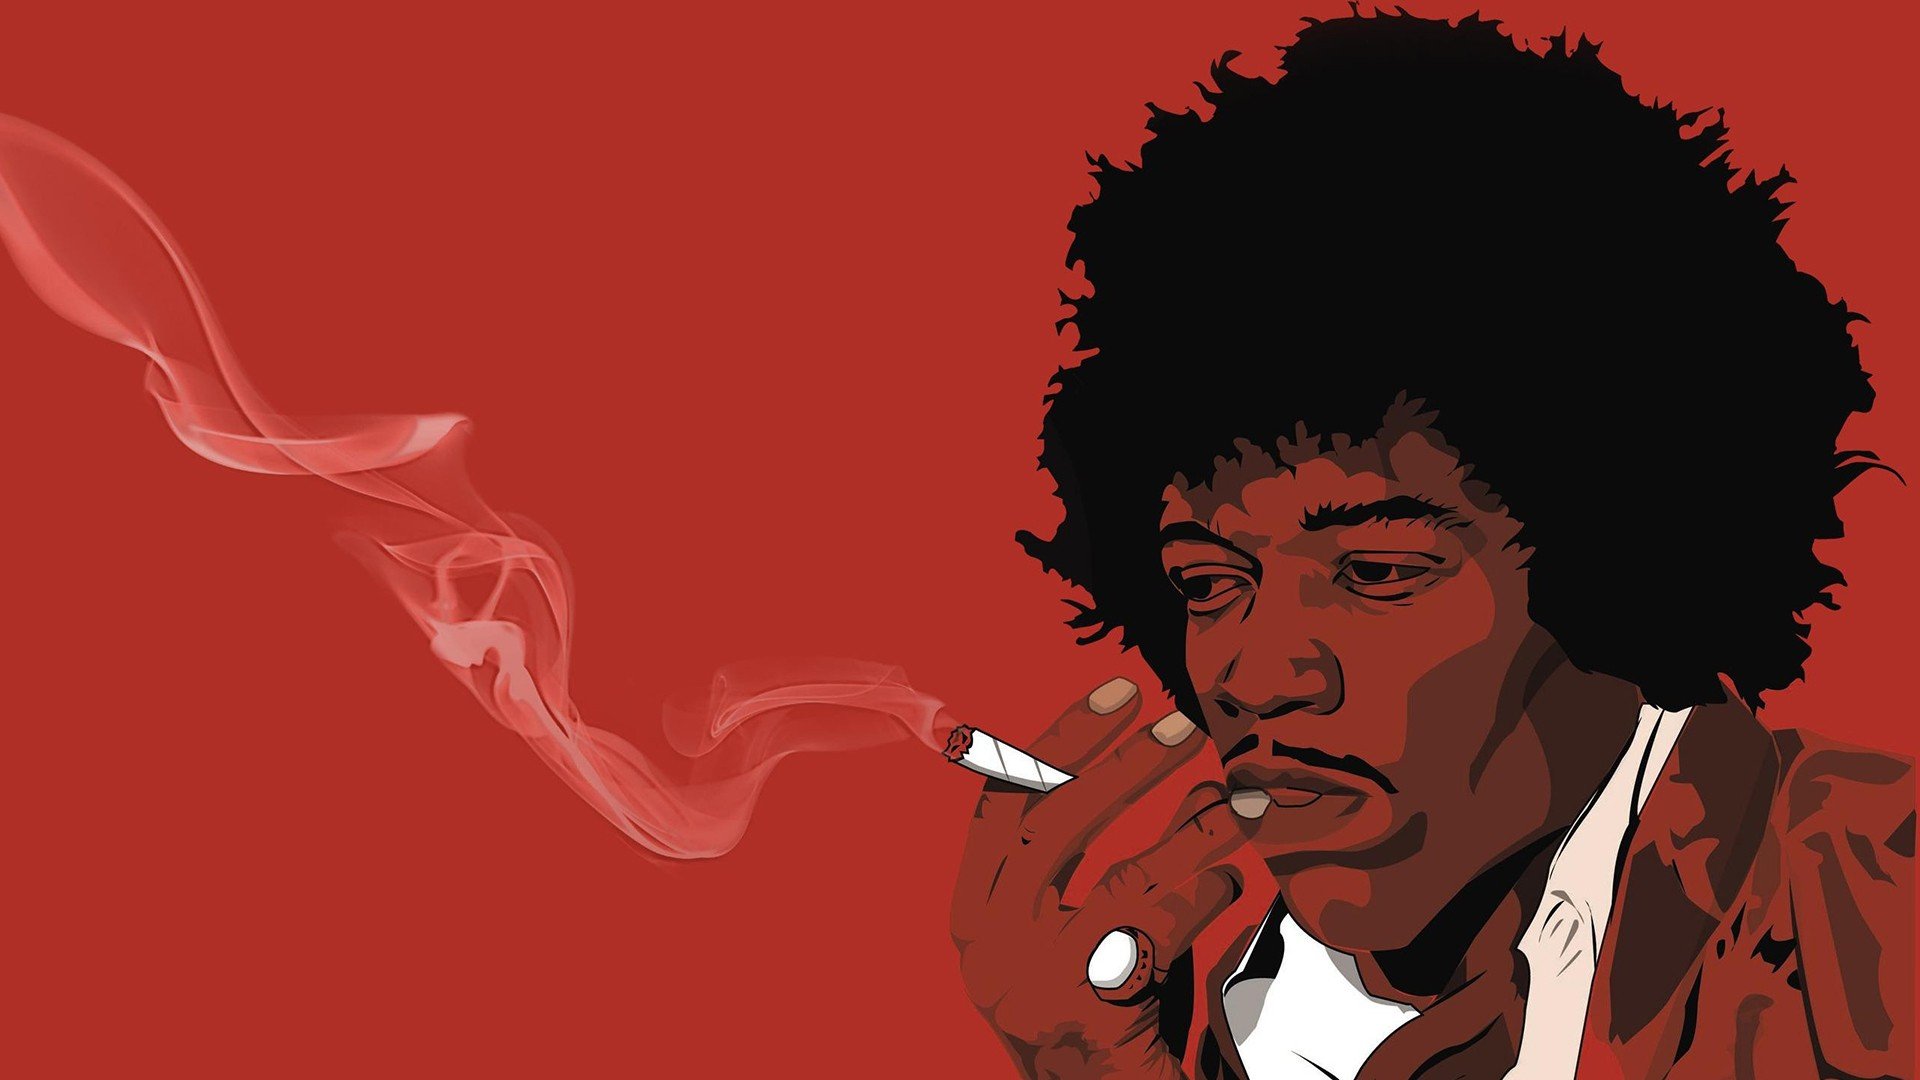 Jimi Hendrix: Jimi Hendrix was an incredible musician, known for his innovative guitar skills and iconic look. Don\'t miss out on this amazing image that captures the essence of his talent and style! 